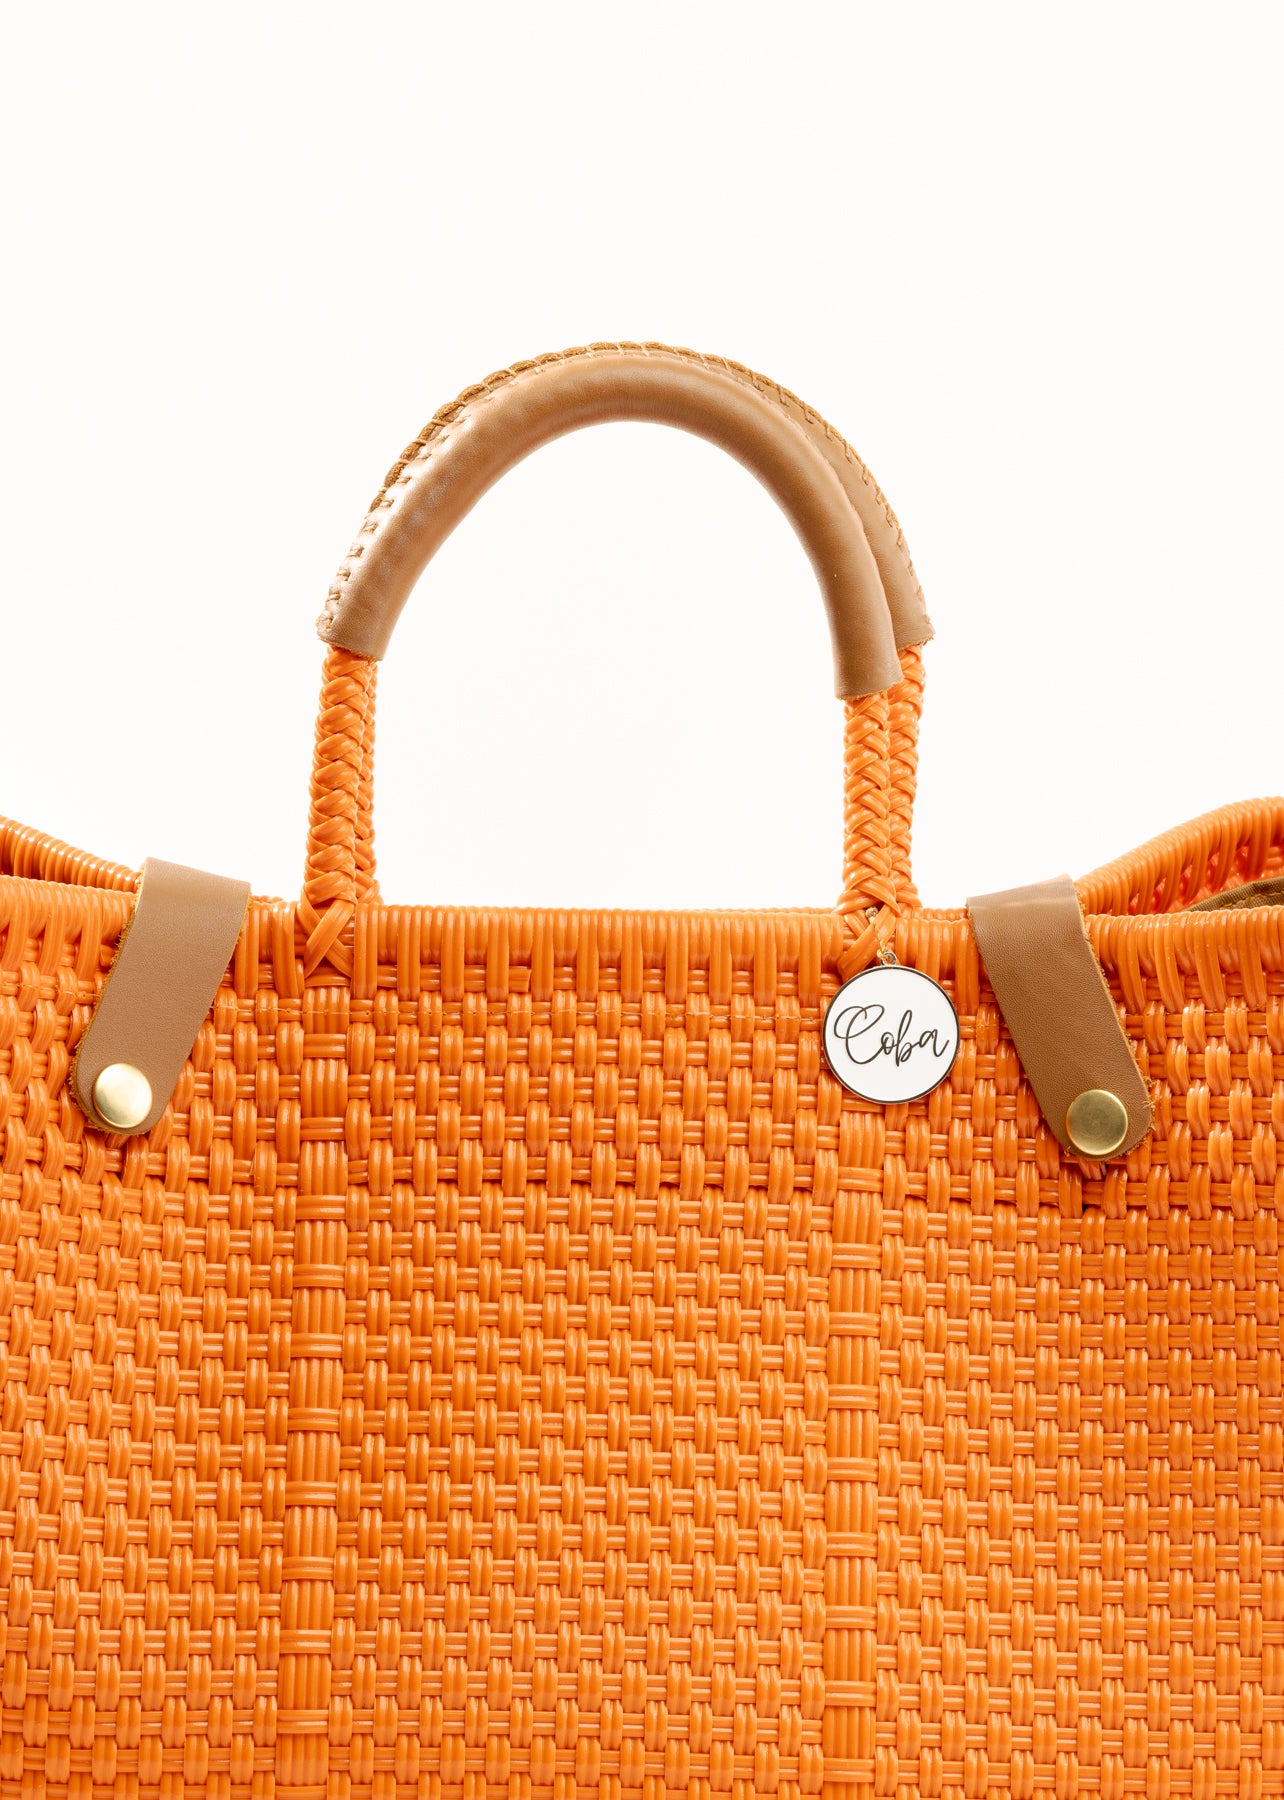 Closeup of woven fabric texture of orange woven handbag with tan leather handle, closure straps, and silver Coba medallion